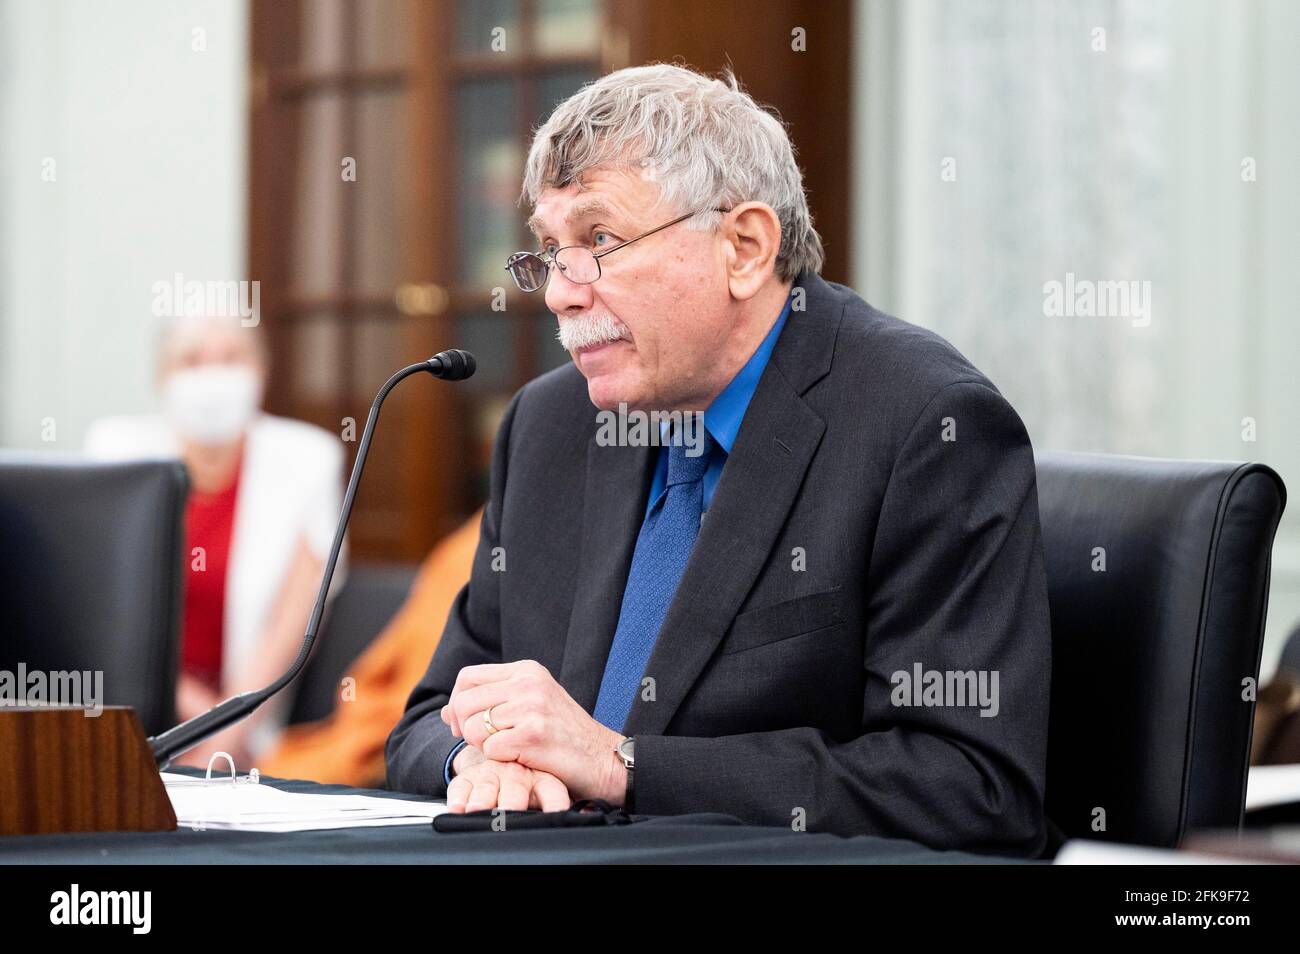 Washington, DC, USA. 29th Apr, 2021. April 29, 2021 - Washington, DC, United States: ERIC LANDER, nominee to be Director of the Office of Science and Technology Policy, speaking at a hearing of the Senate Commerce, Science, and Transportation committee. Credit: Michael Brochstein/ZUMA Wire/Alamy Live News Stock Photo